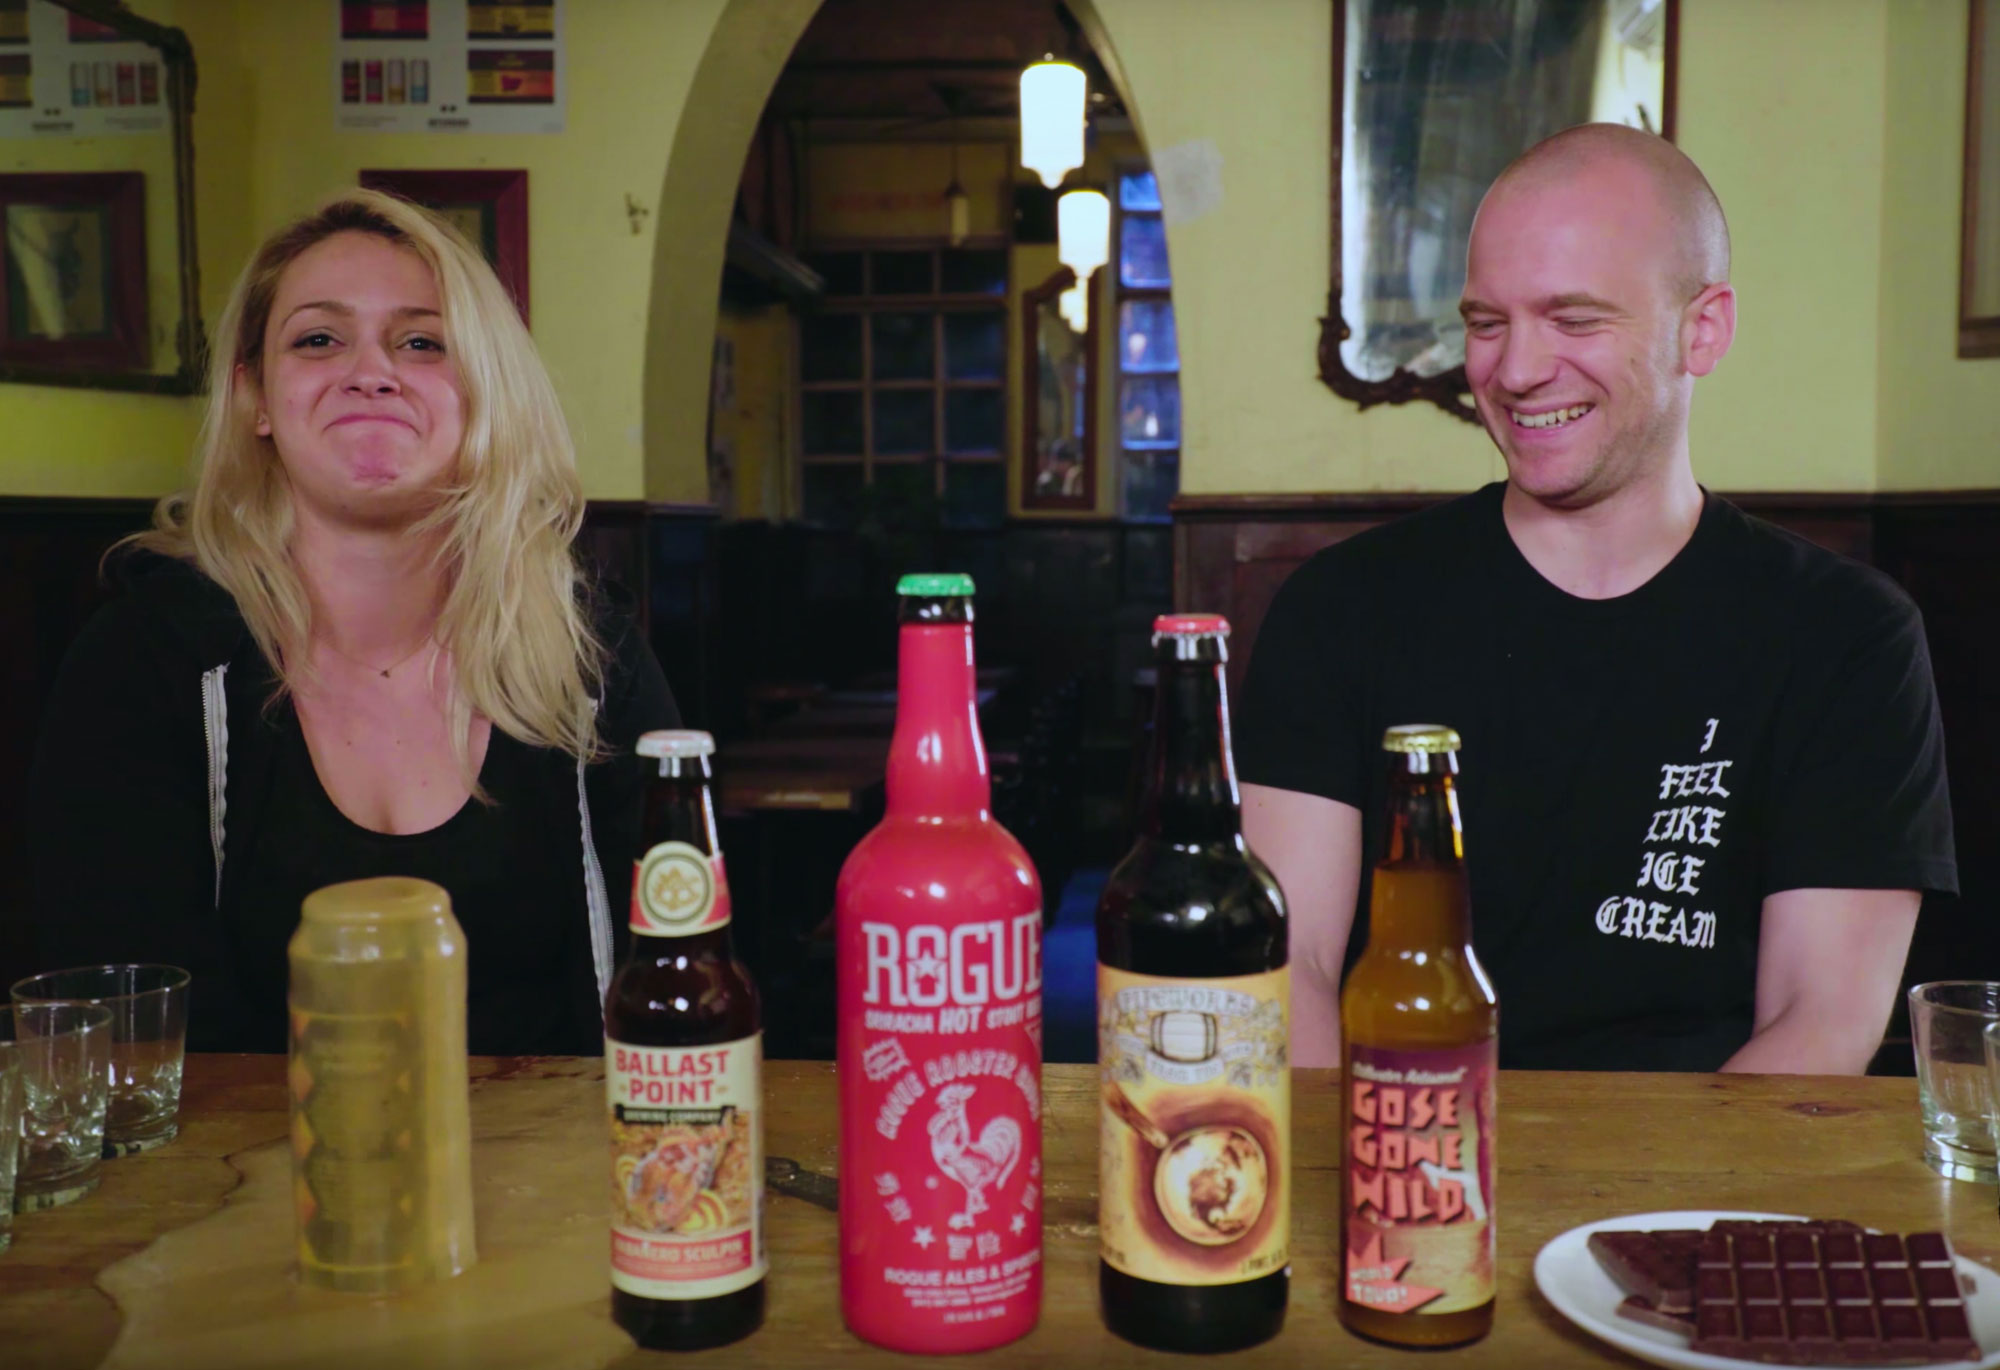 Watch a Pro Chili-Eater Review 5 Spicy Beers